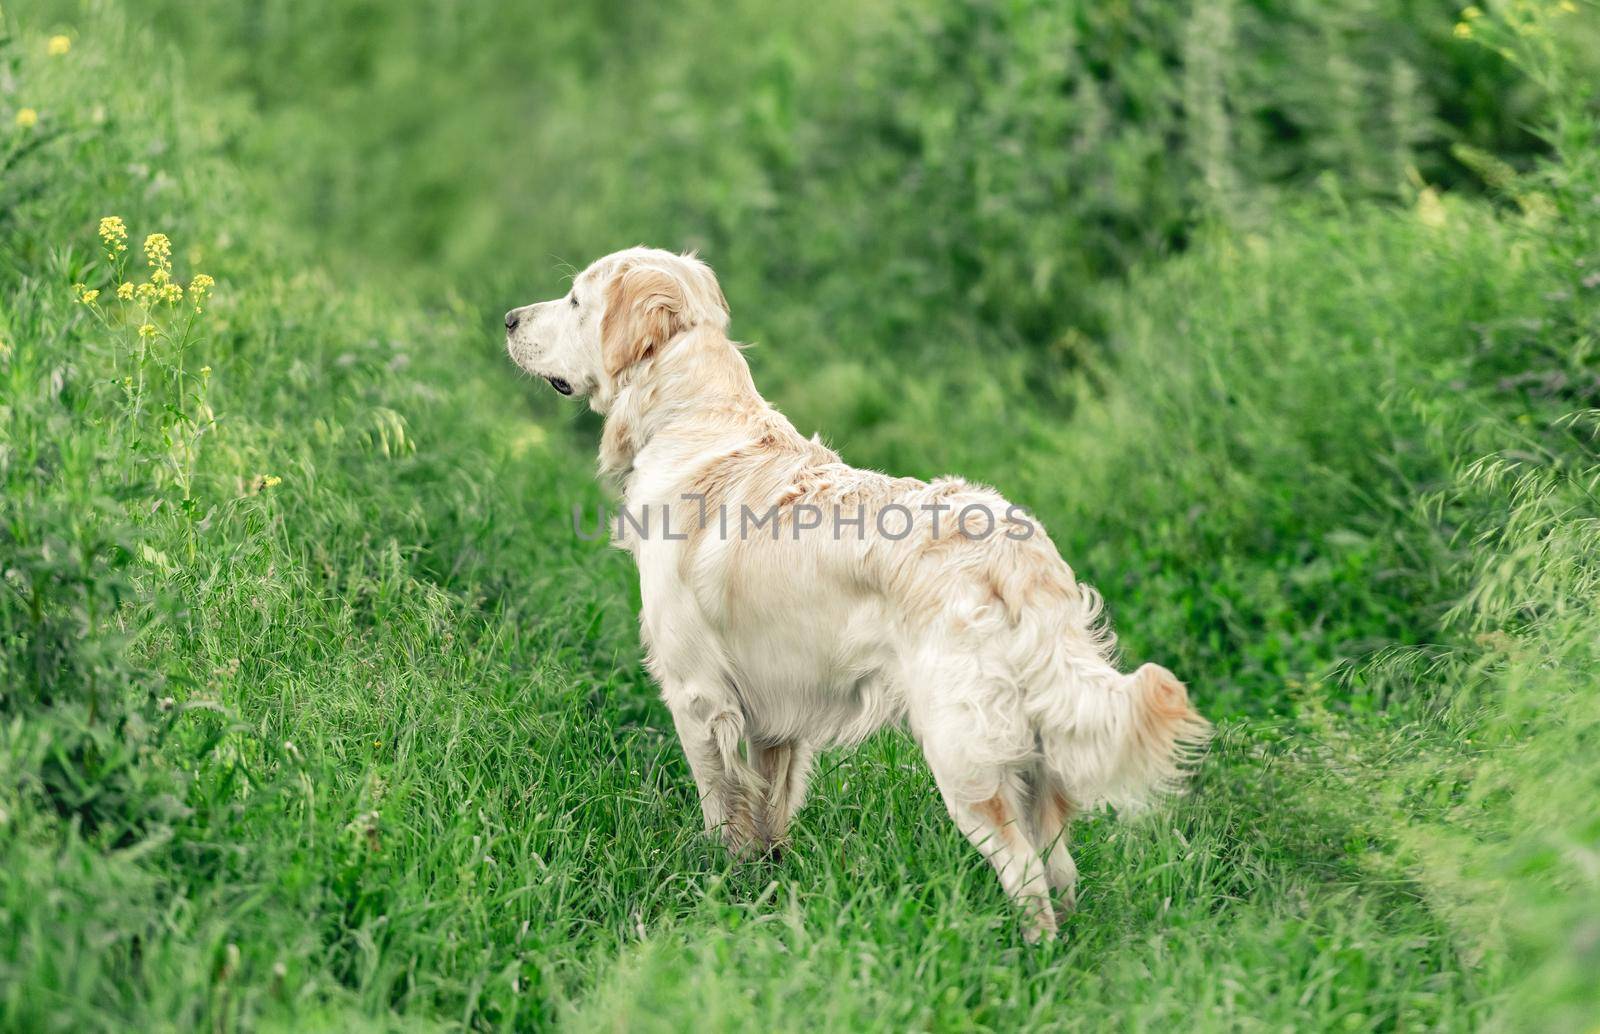 Adorable dog standing in green grass by tan4ikk1